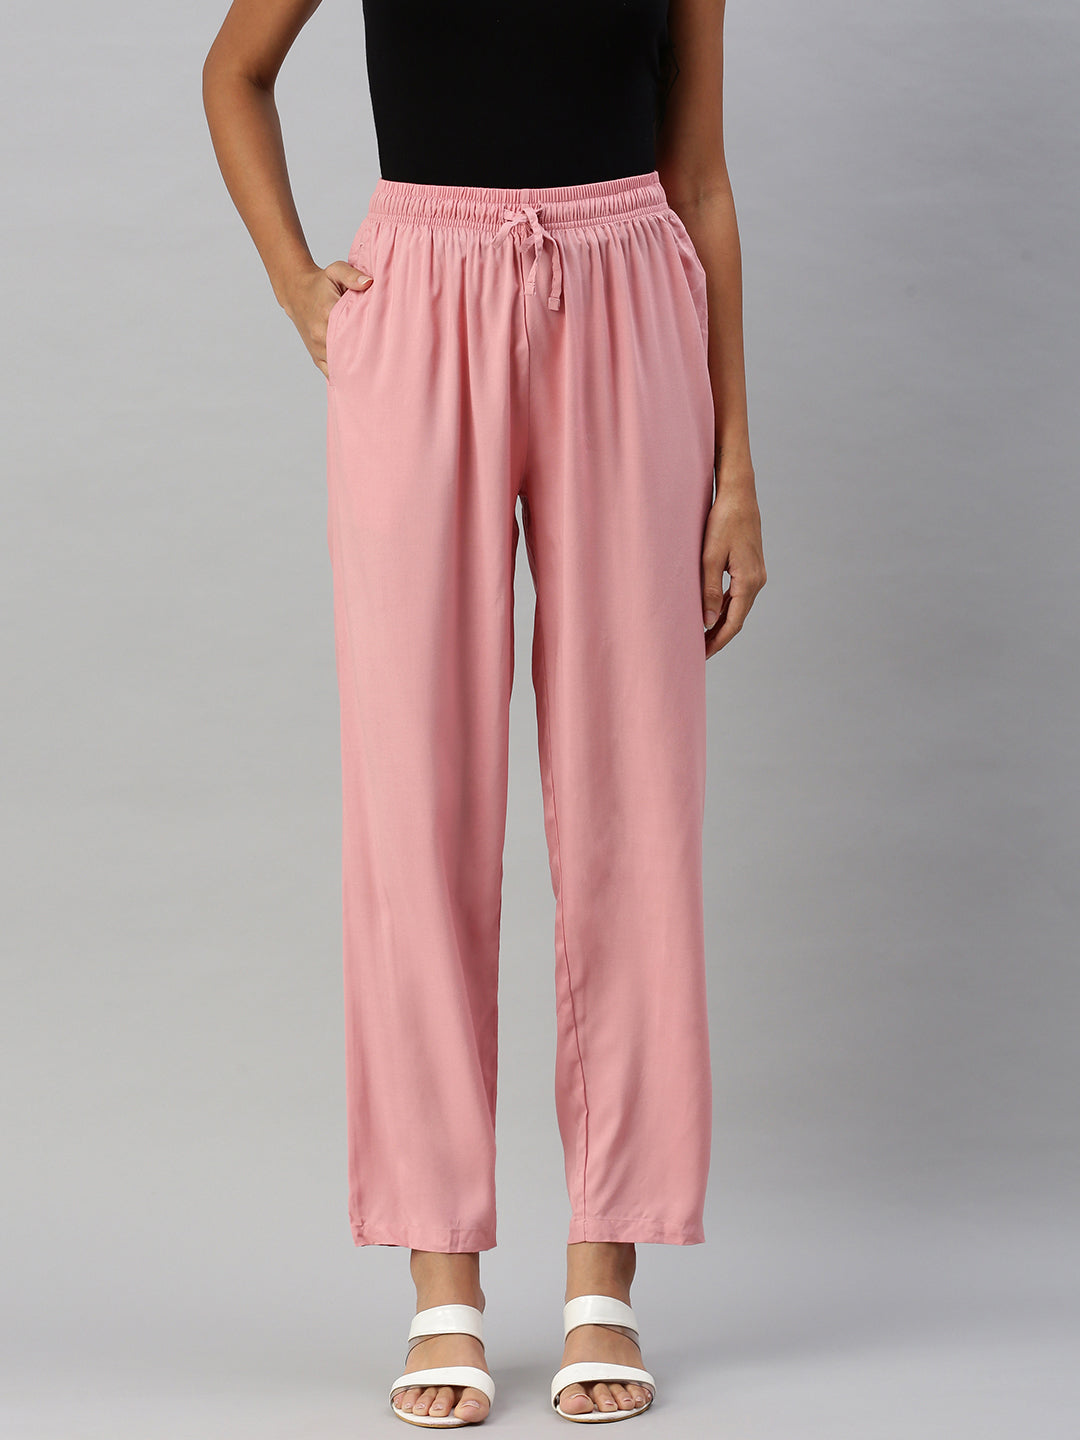 Prisma Casual Pant-Dusty Pink: Chic and Comfortable Clothing for Women